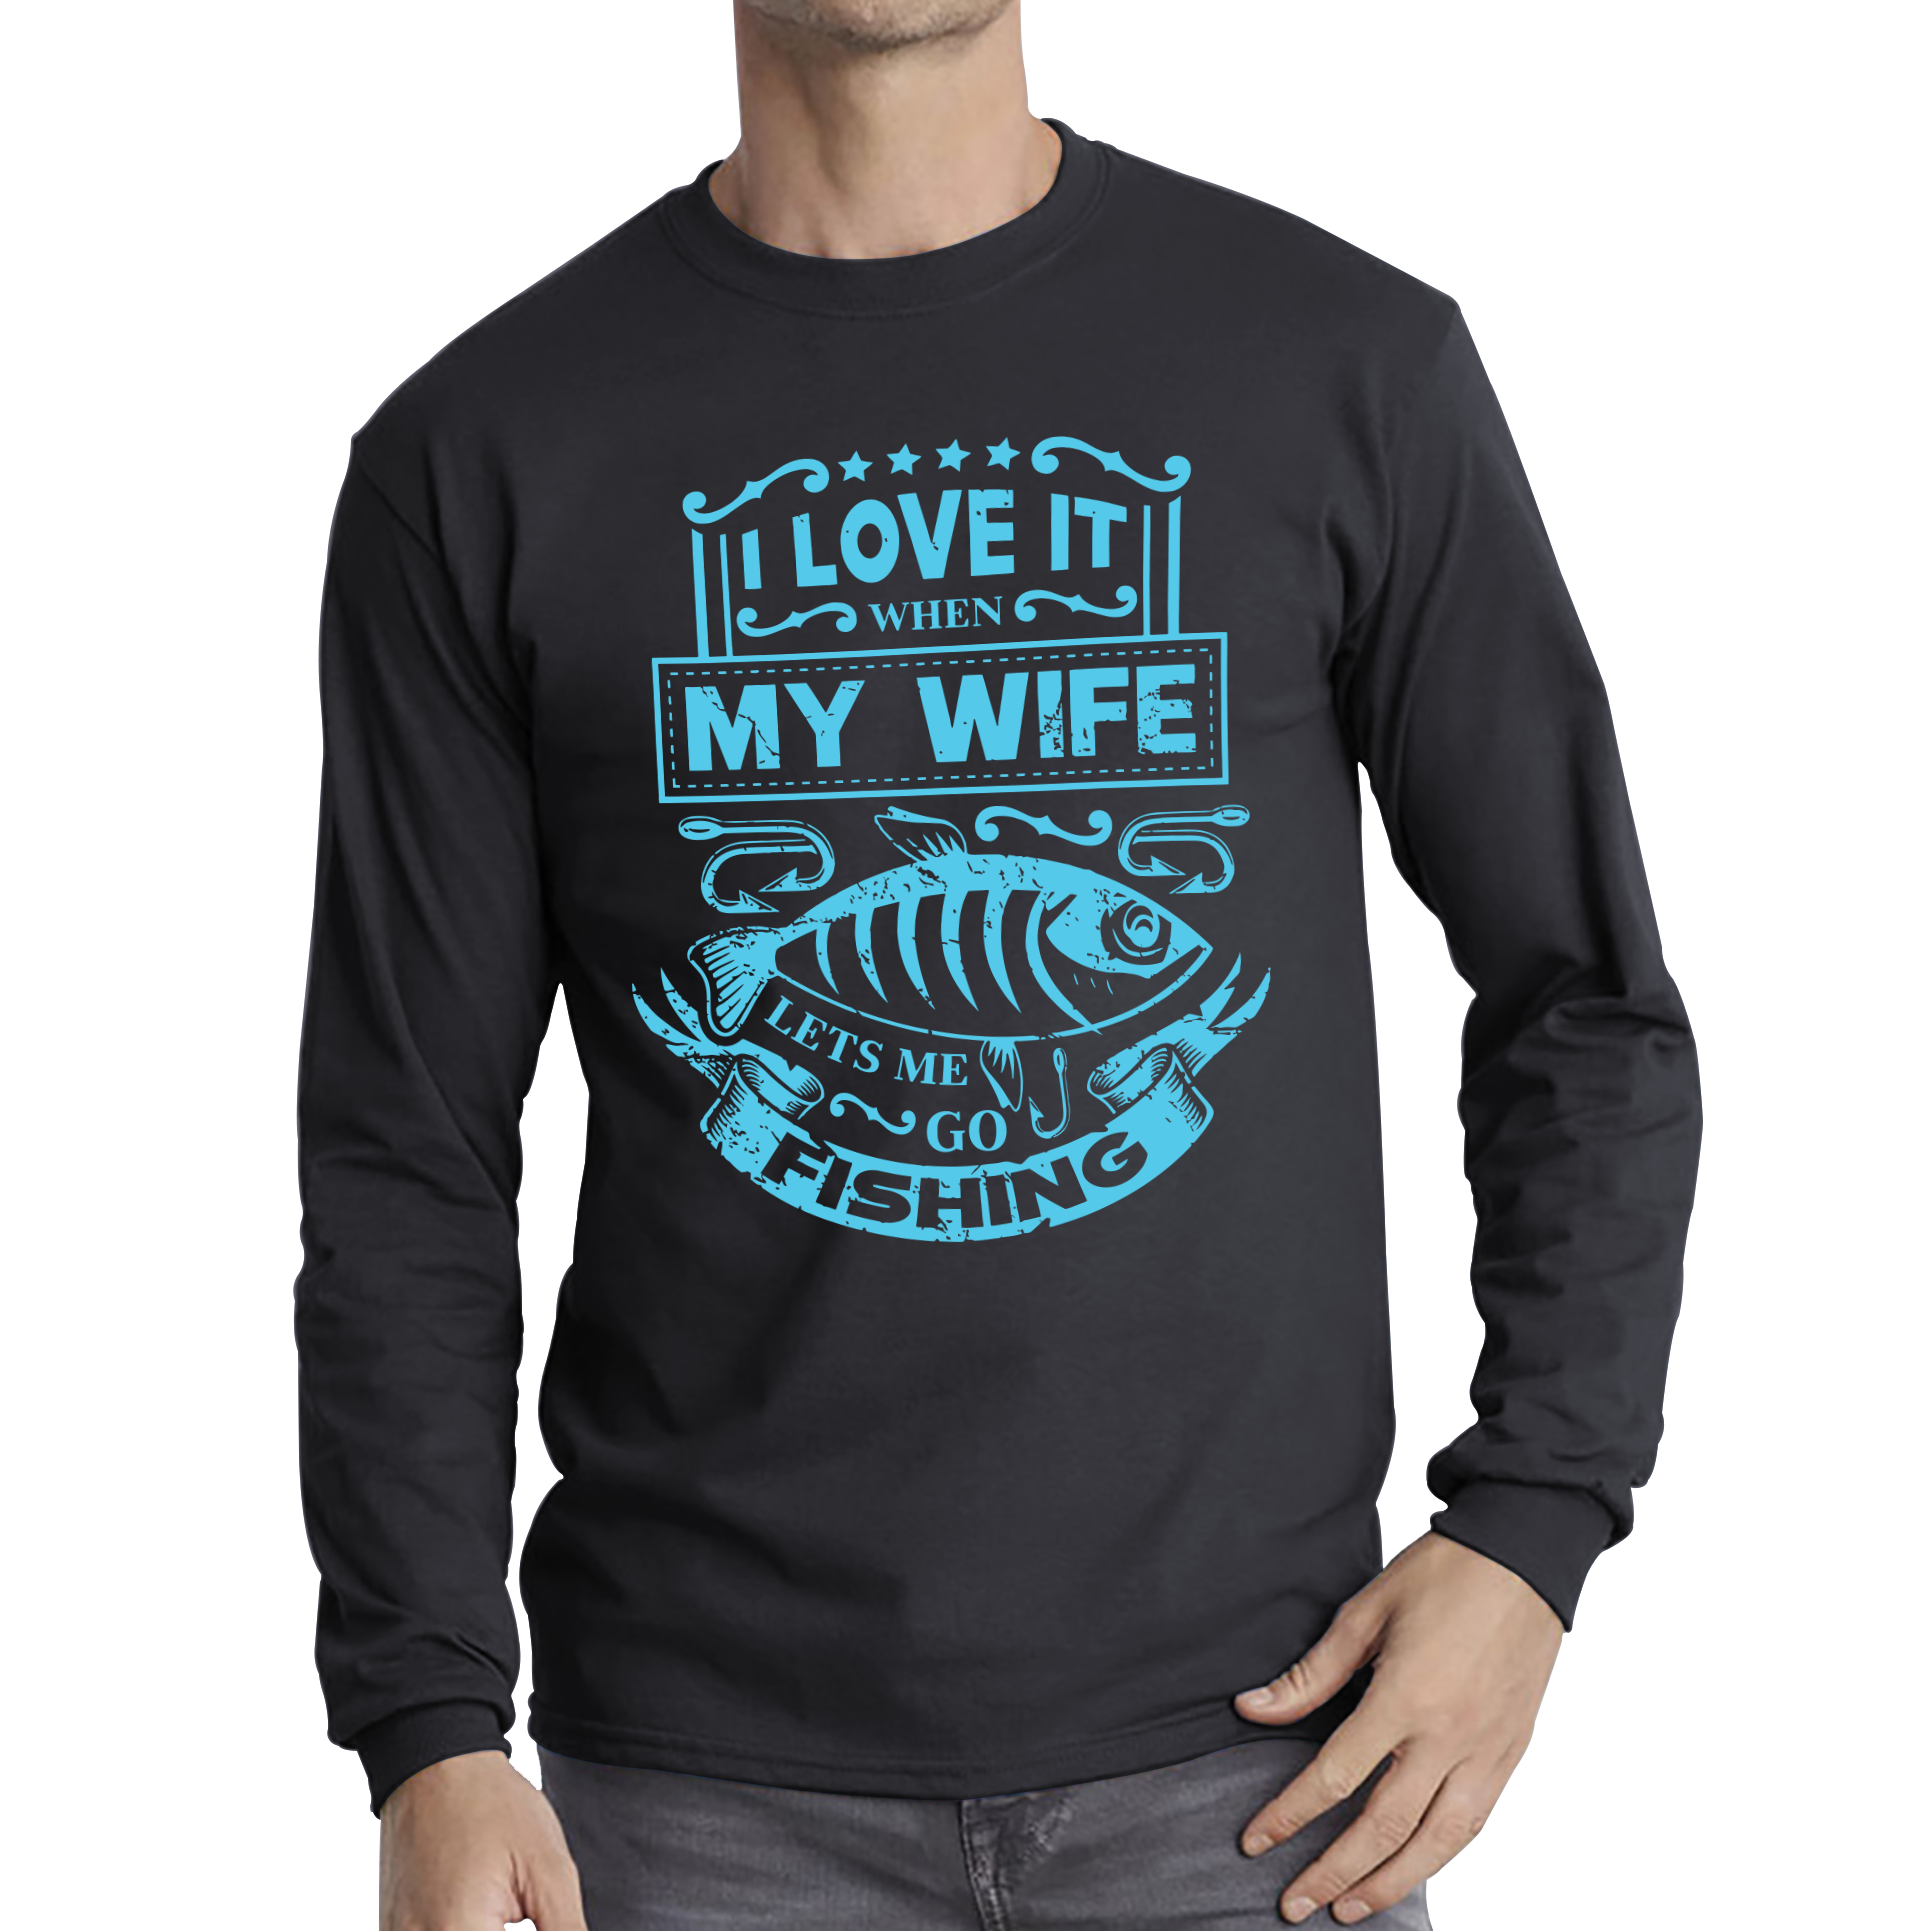 Funny I Love It When My Wife Lets Me Go Fishing Adult Long Sleeve T Shirt